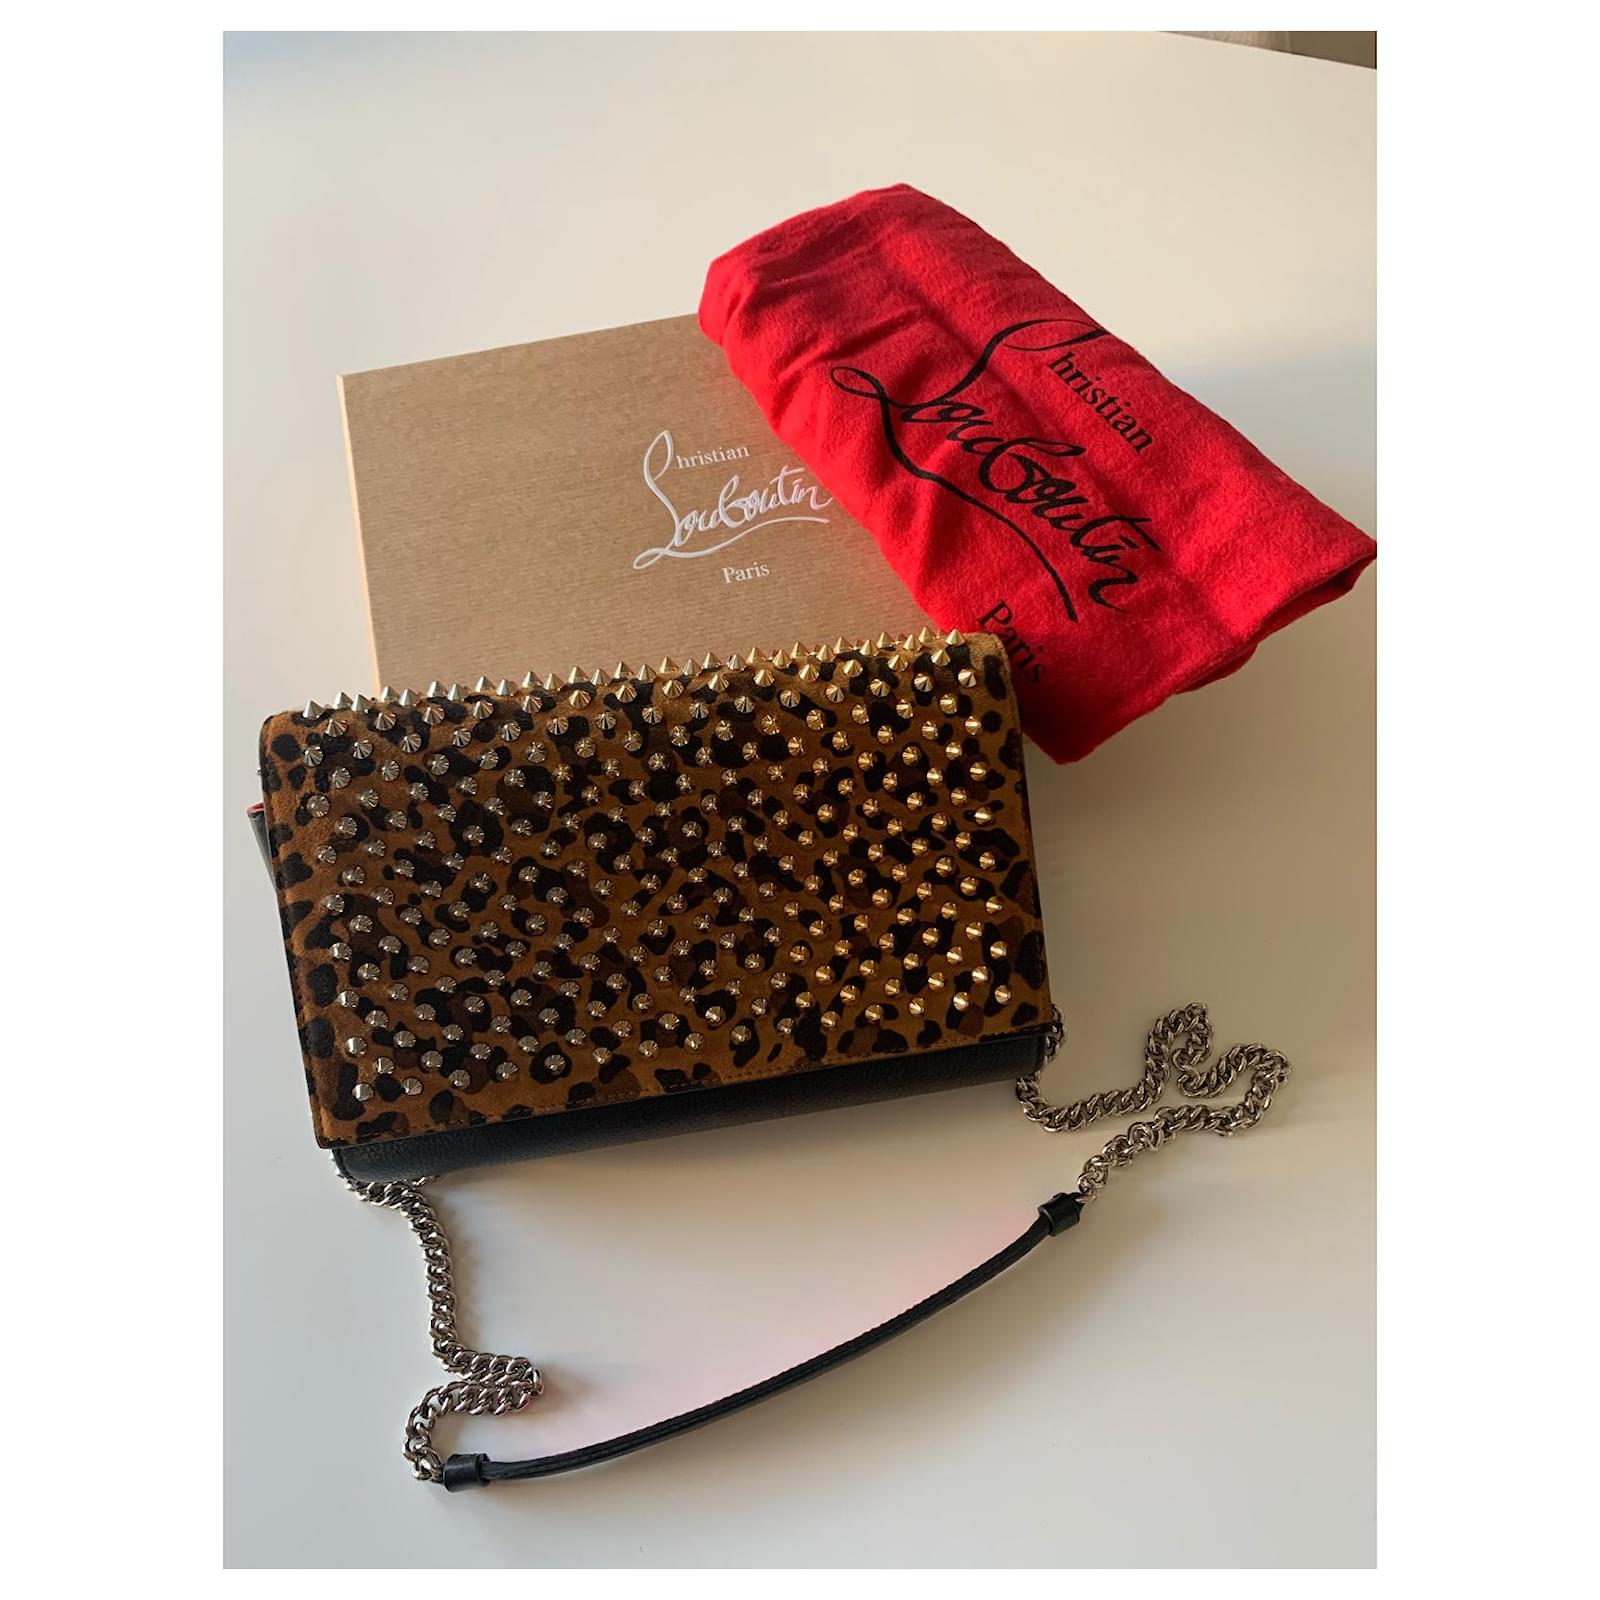 NEW CHRISTIAN LOUBOUTIN KYPIPOUCH HANDBAG 1225017 PURSE STRAP